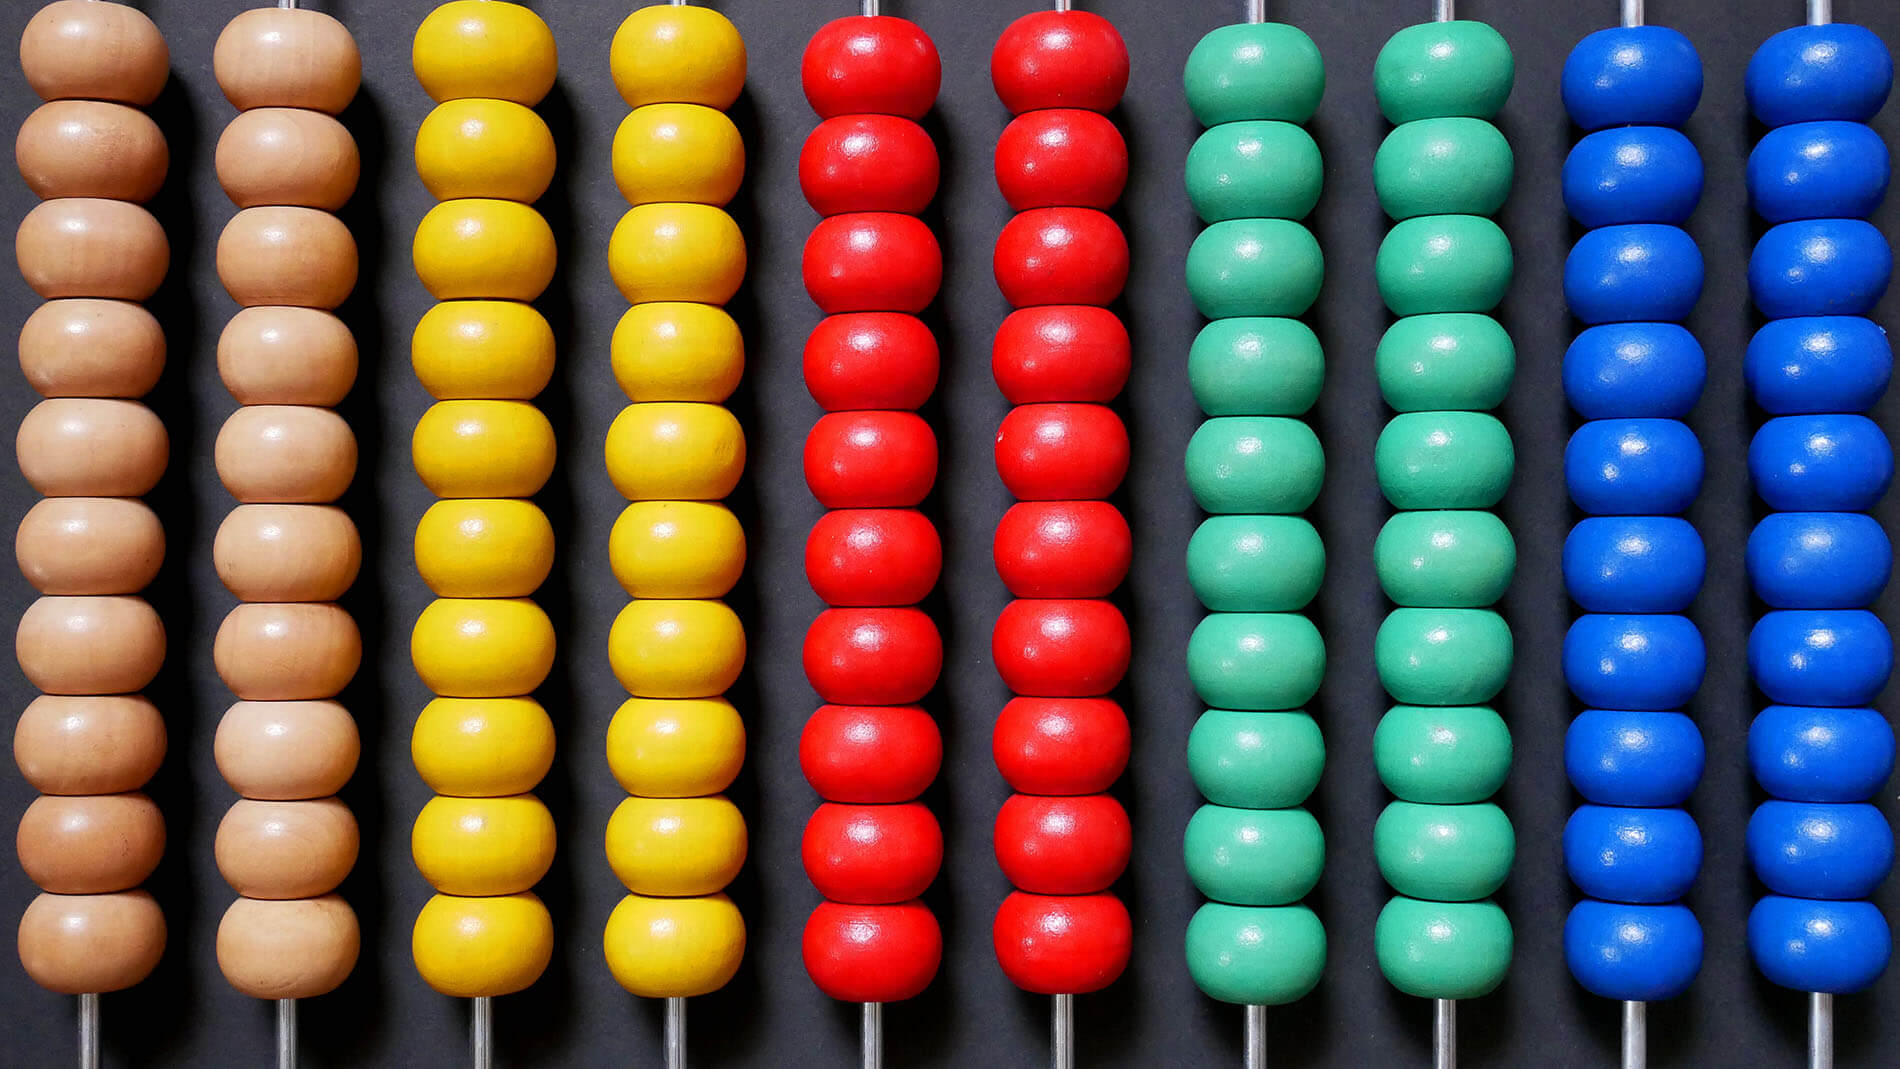 colorful-abacus-for-math-counting-learning-2022-01-23-17-39-48-utc